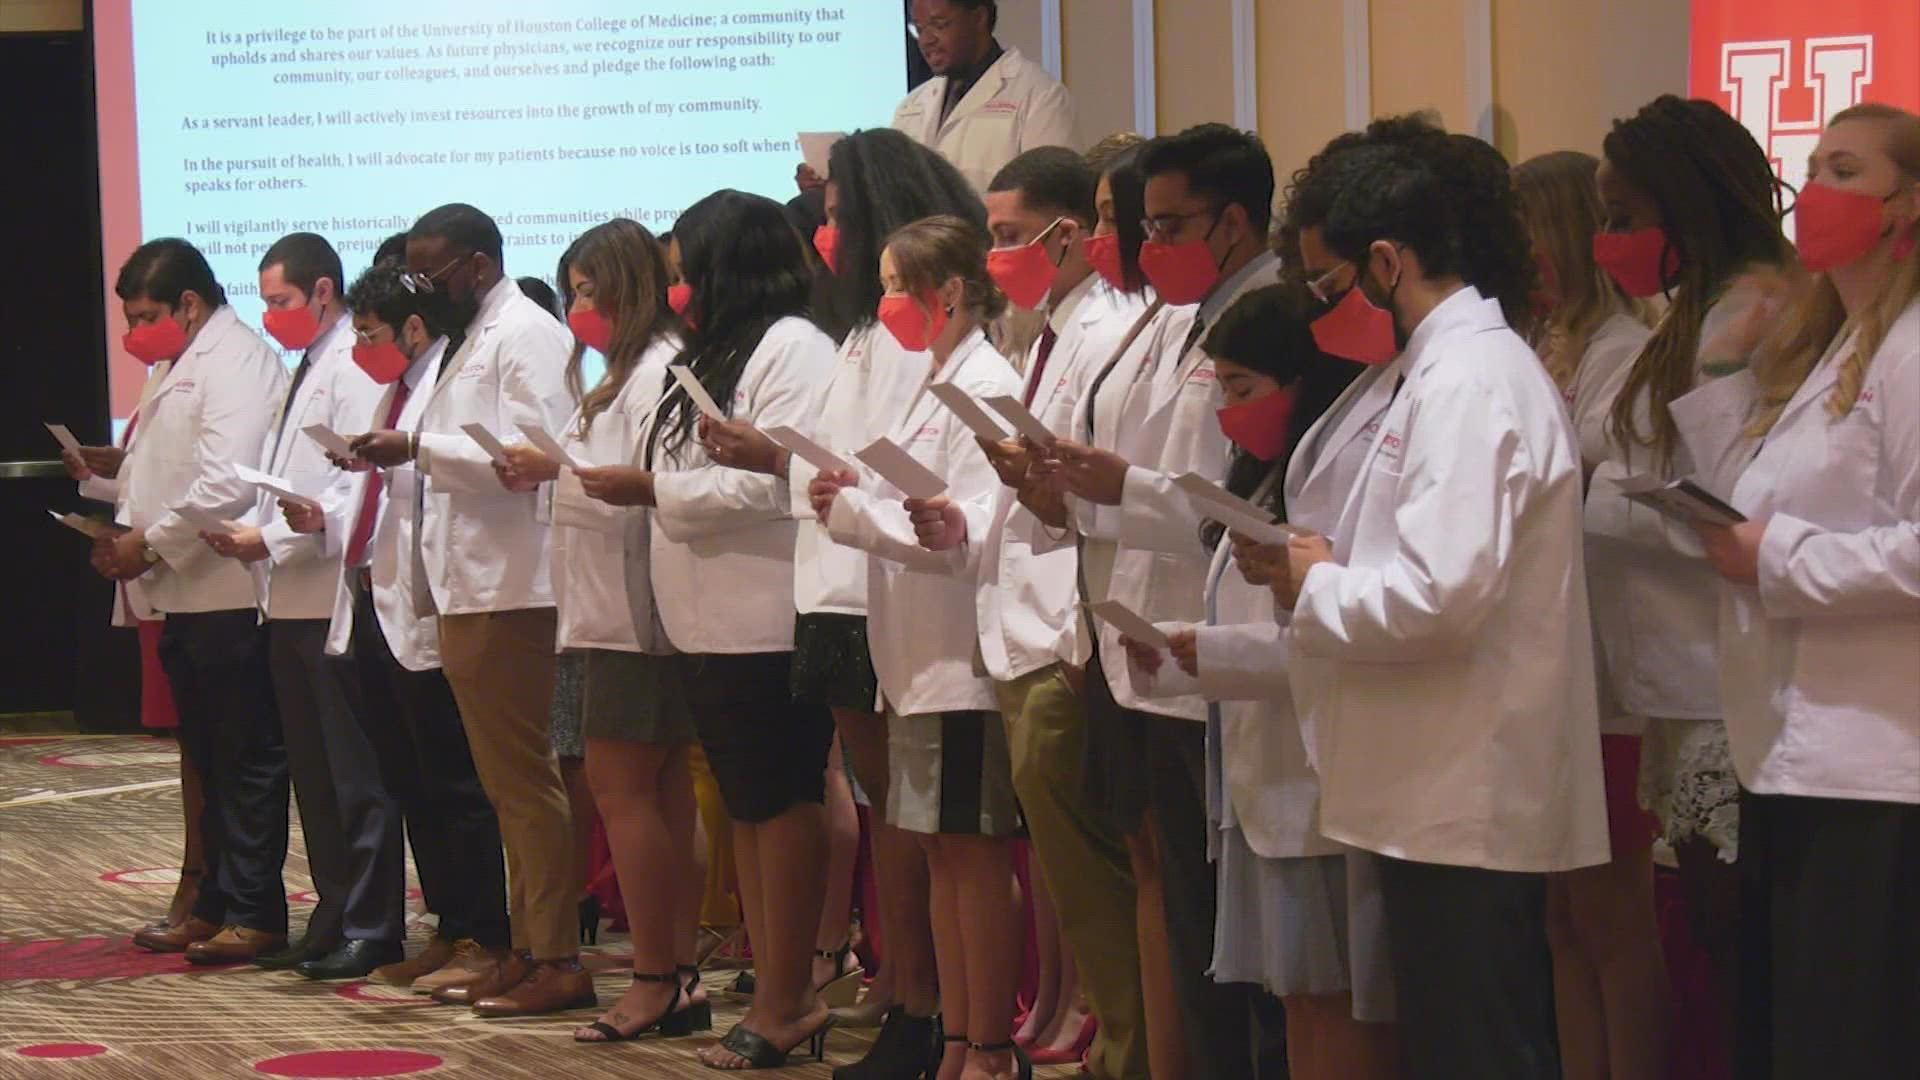 The University of Houston’s College of Medicine welcomed 30 new students Saturday during its white coat ceremony.